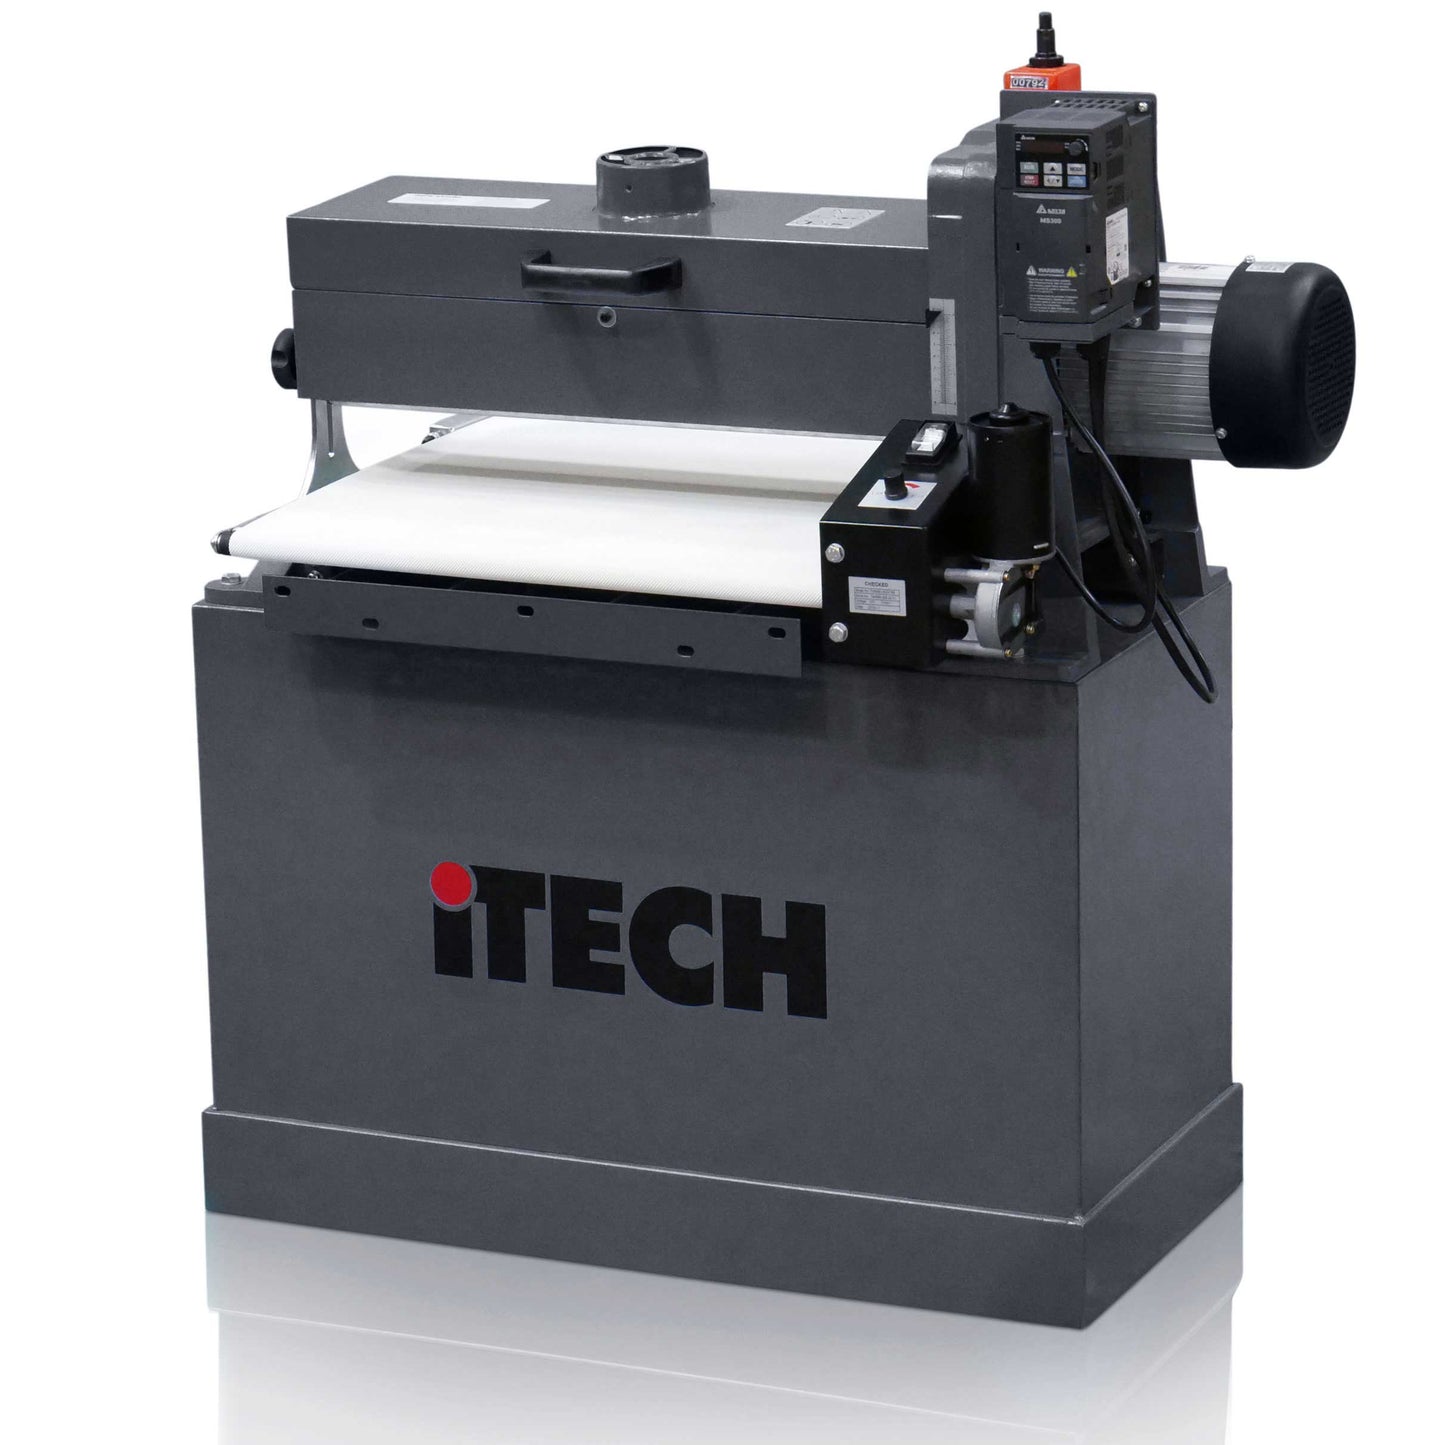 ITECH MS3156 550MM Wide Drum and Brush Sander